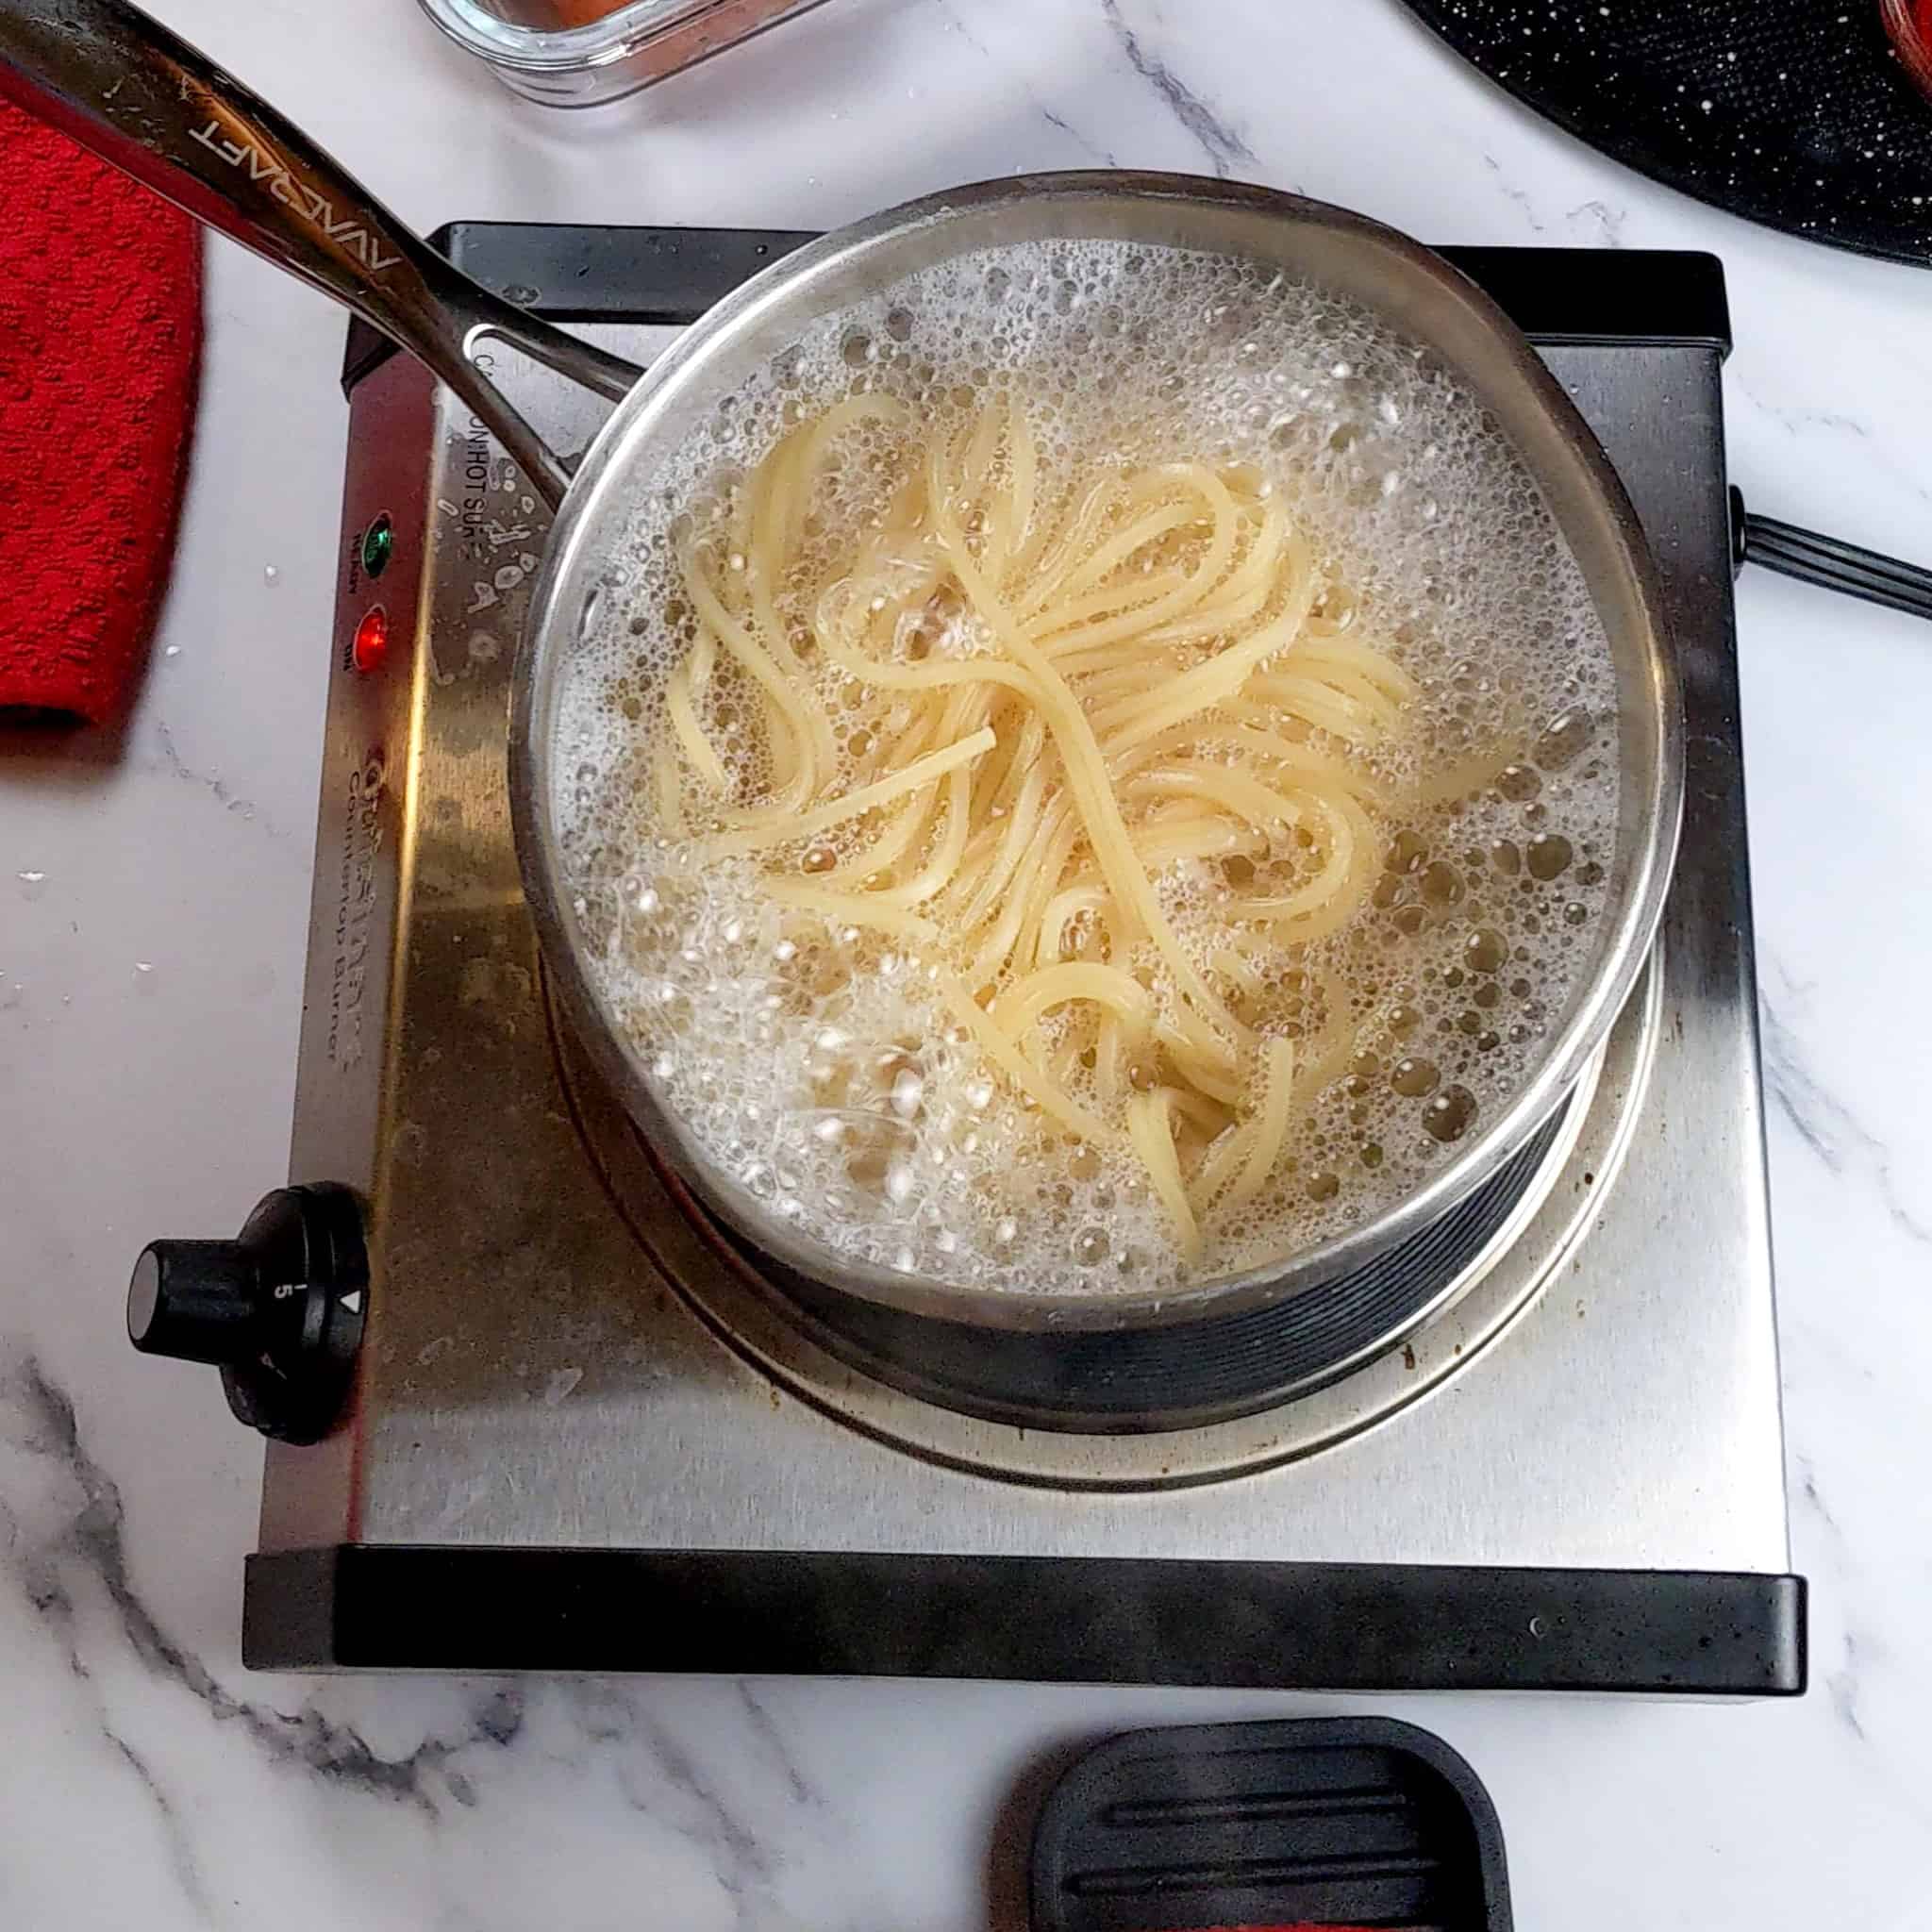 spaghetti boiling in a pot on a portable stove top